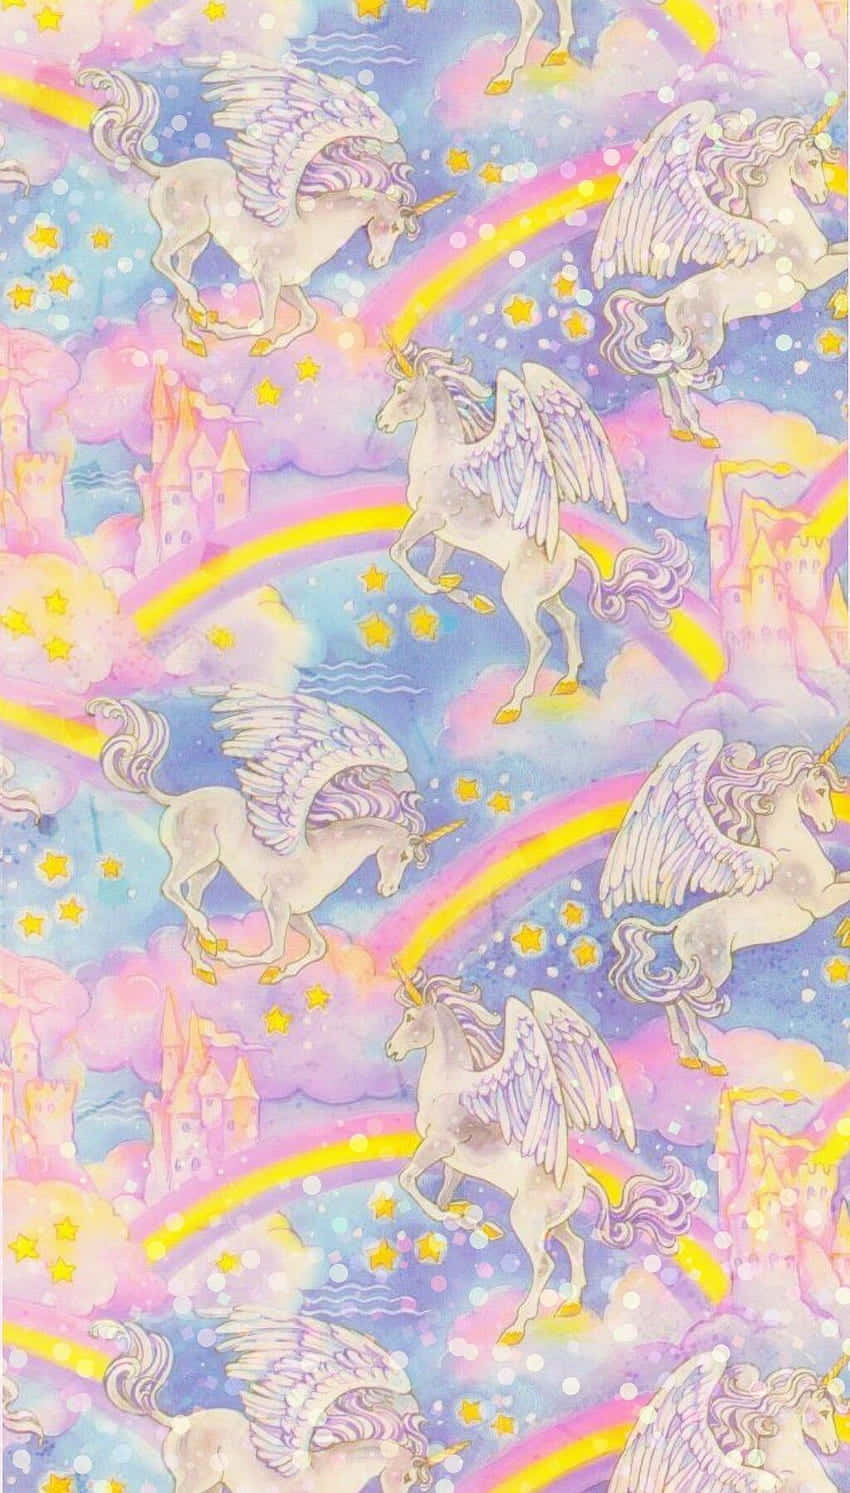 Magical Unicorns from the world of Lisa Frank! Wallpaper